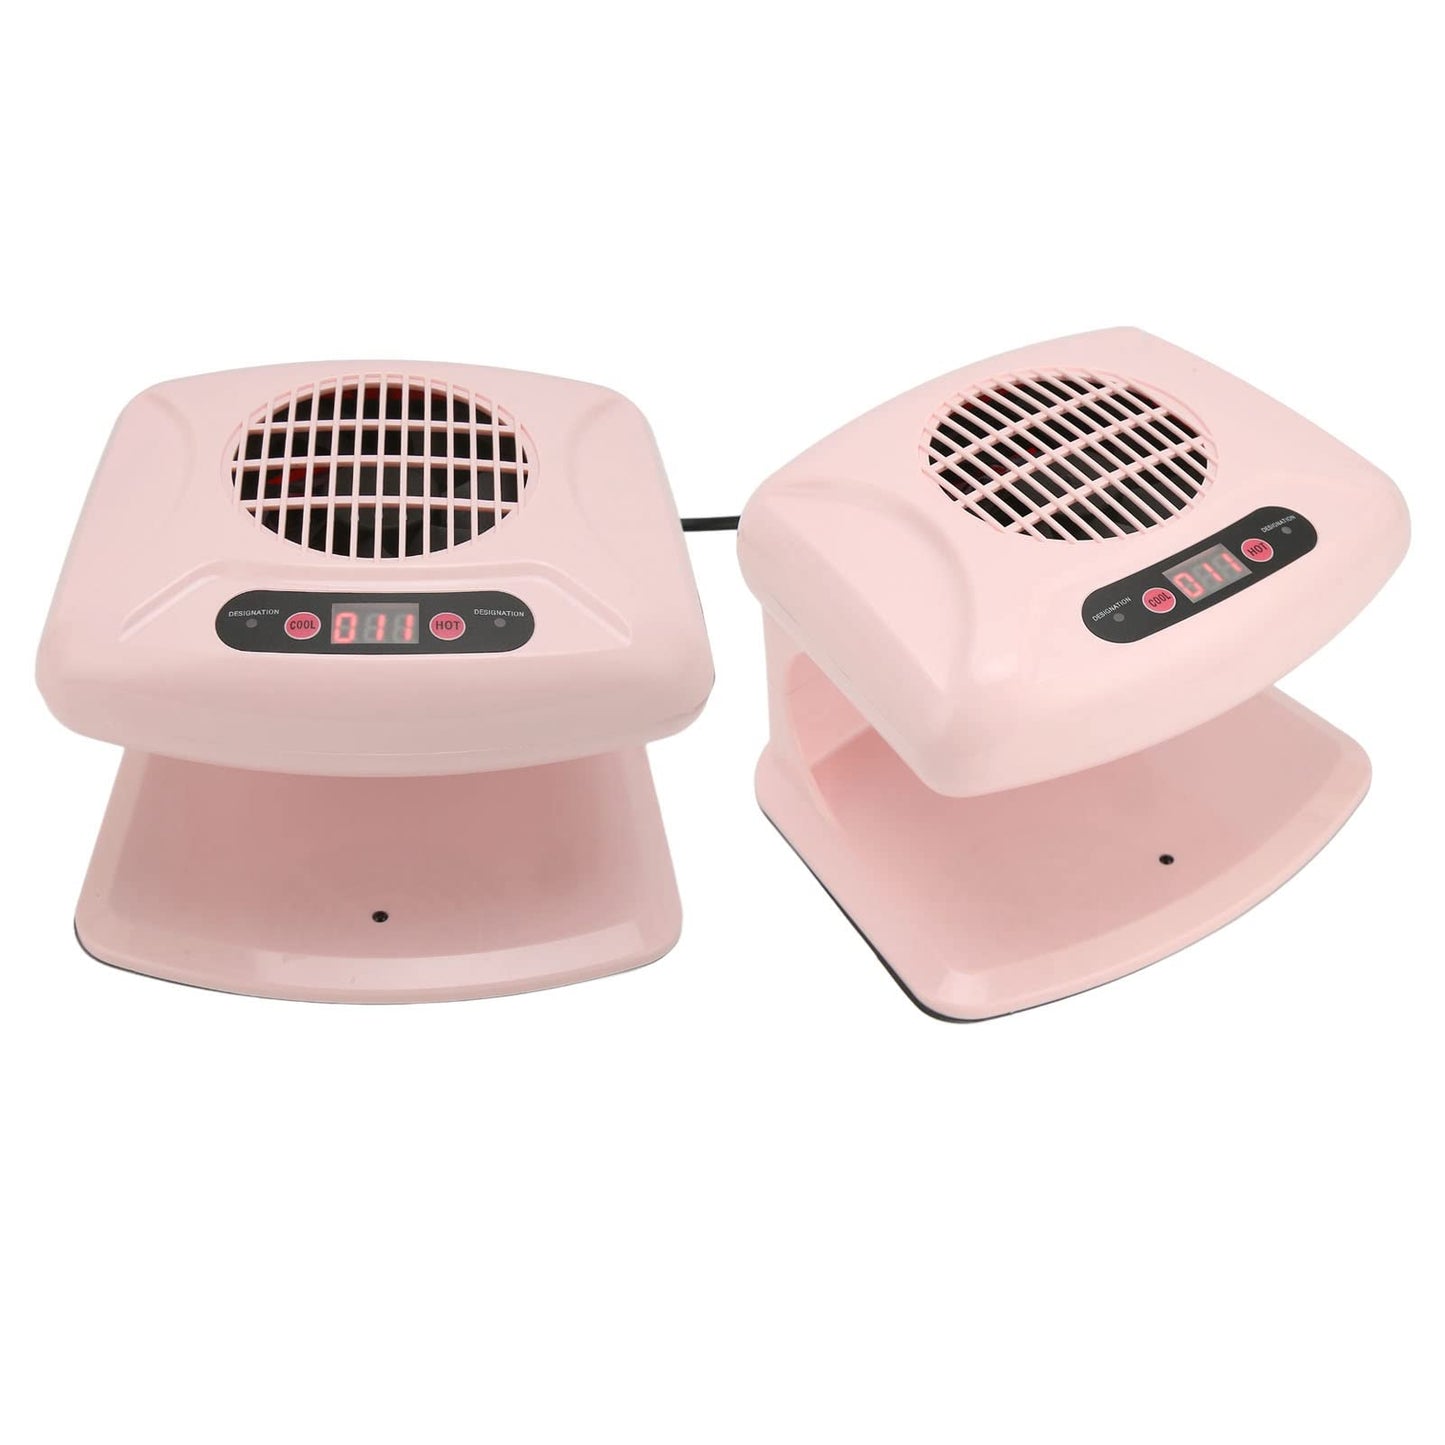 Air Nail Dryer, 300W Nail Fan Blower Dryer Machine with Automatic Sensor Warm and Cool Wind for Both Hands and Feet, Manicure Drying Tool for Regular Nail Polish, Home Salon (UK Plug 220V)